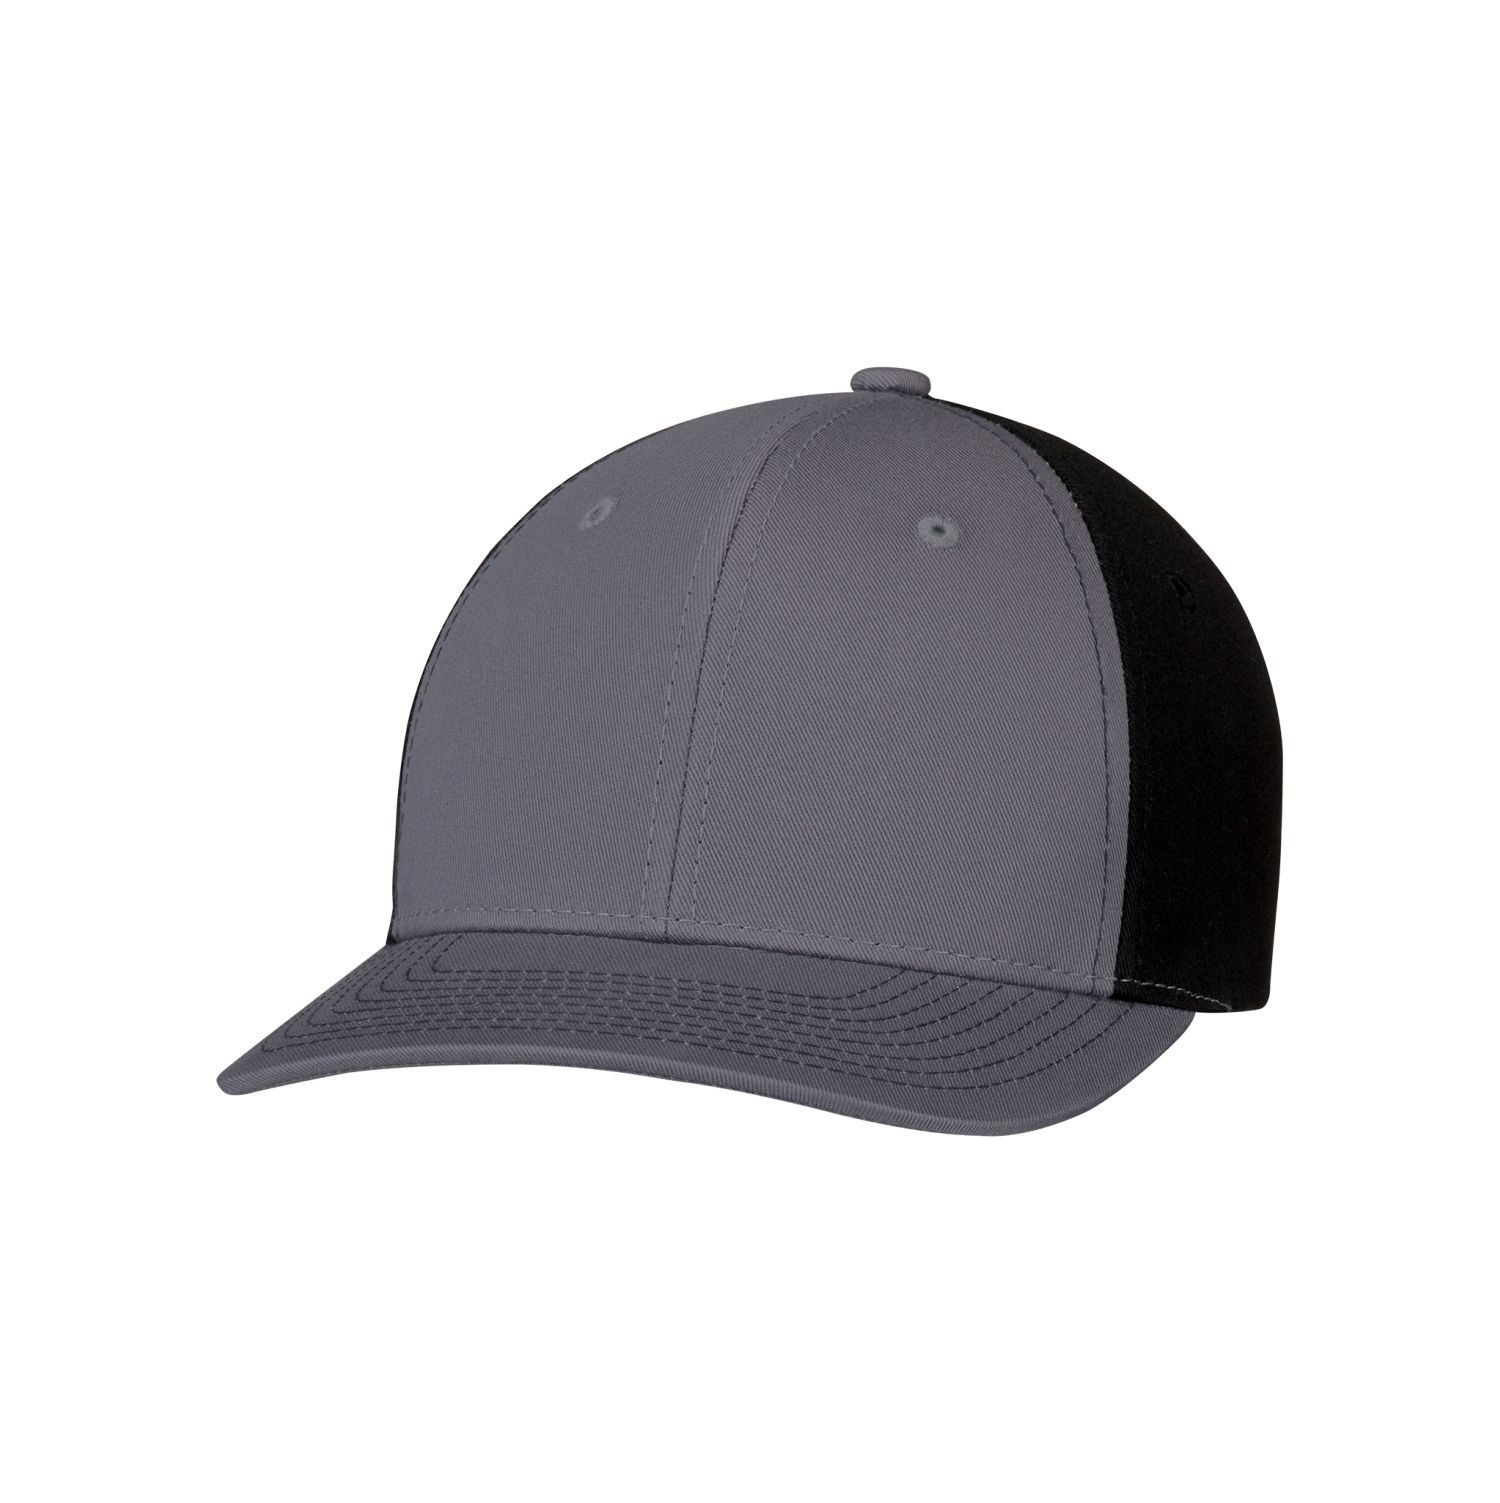 AJM 6-Panel Constructed Pro-Round Hat #8F010M Charcoal / Charcoal / Black